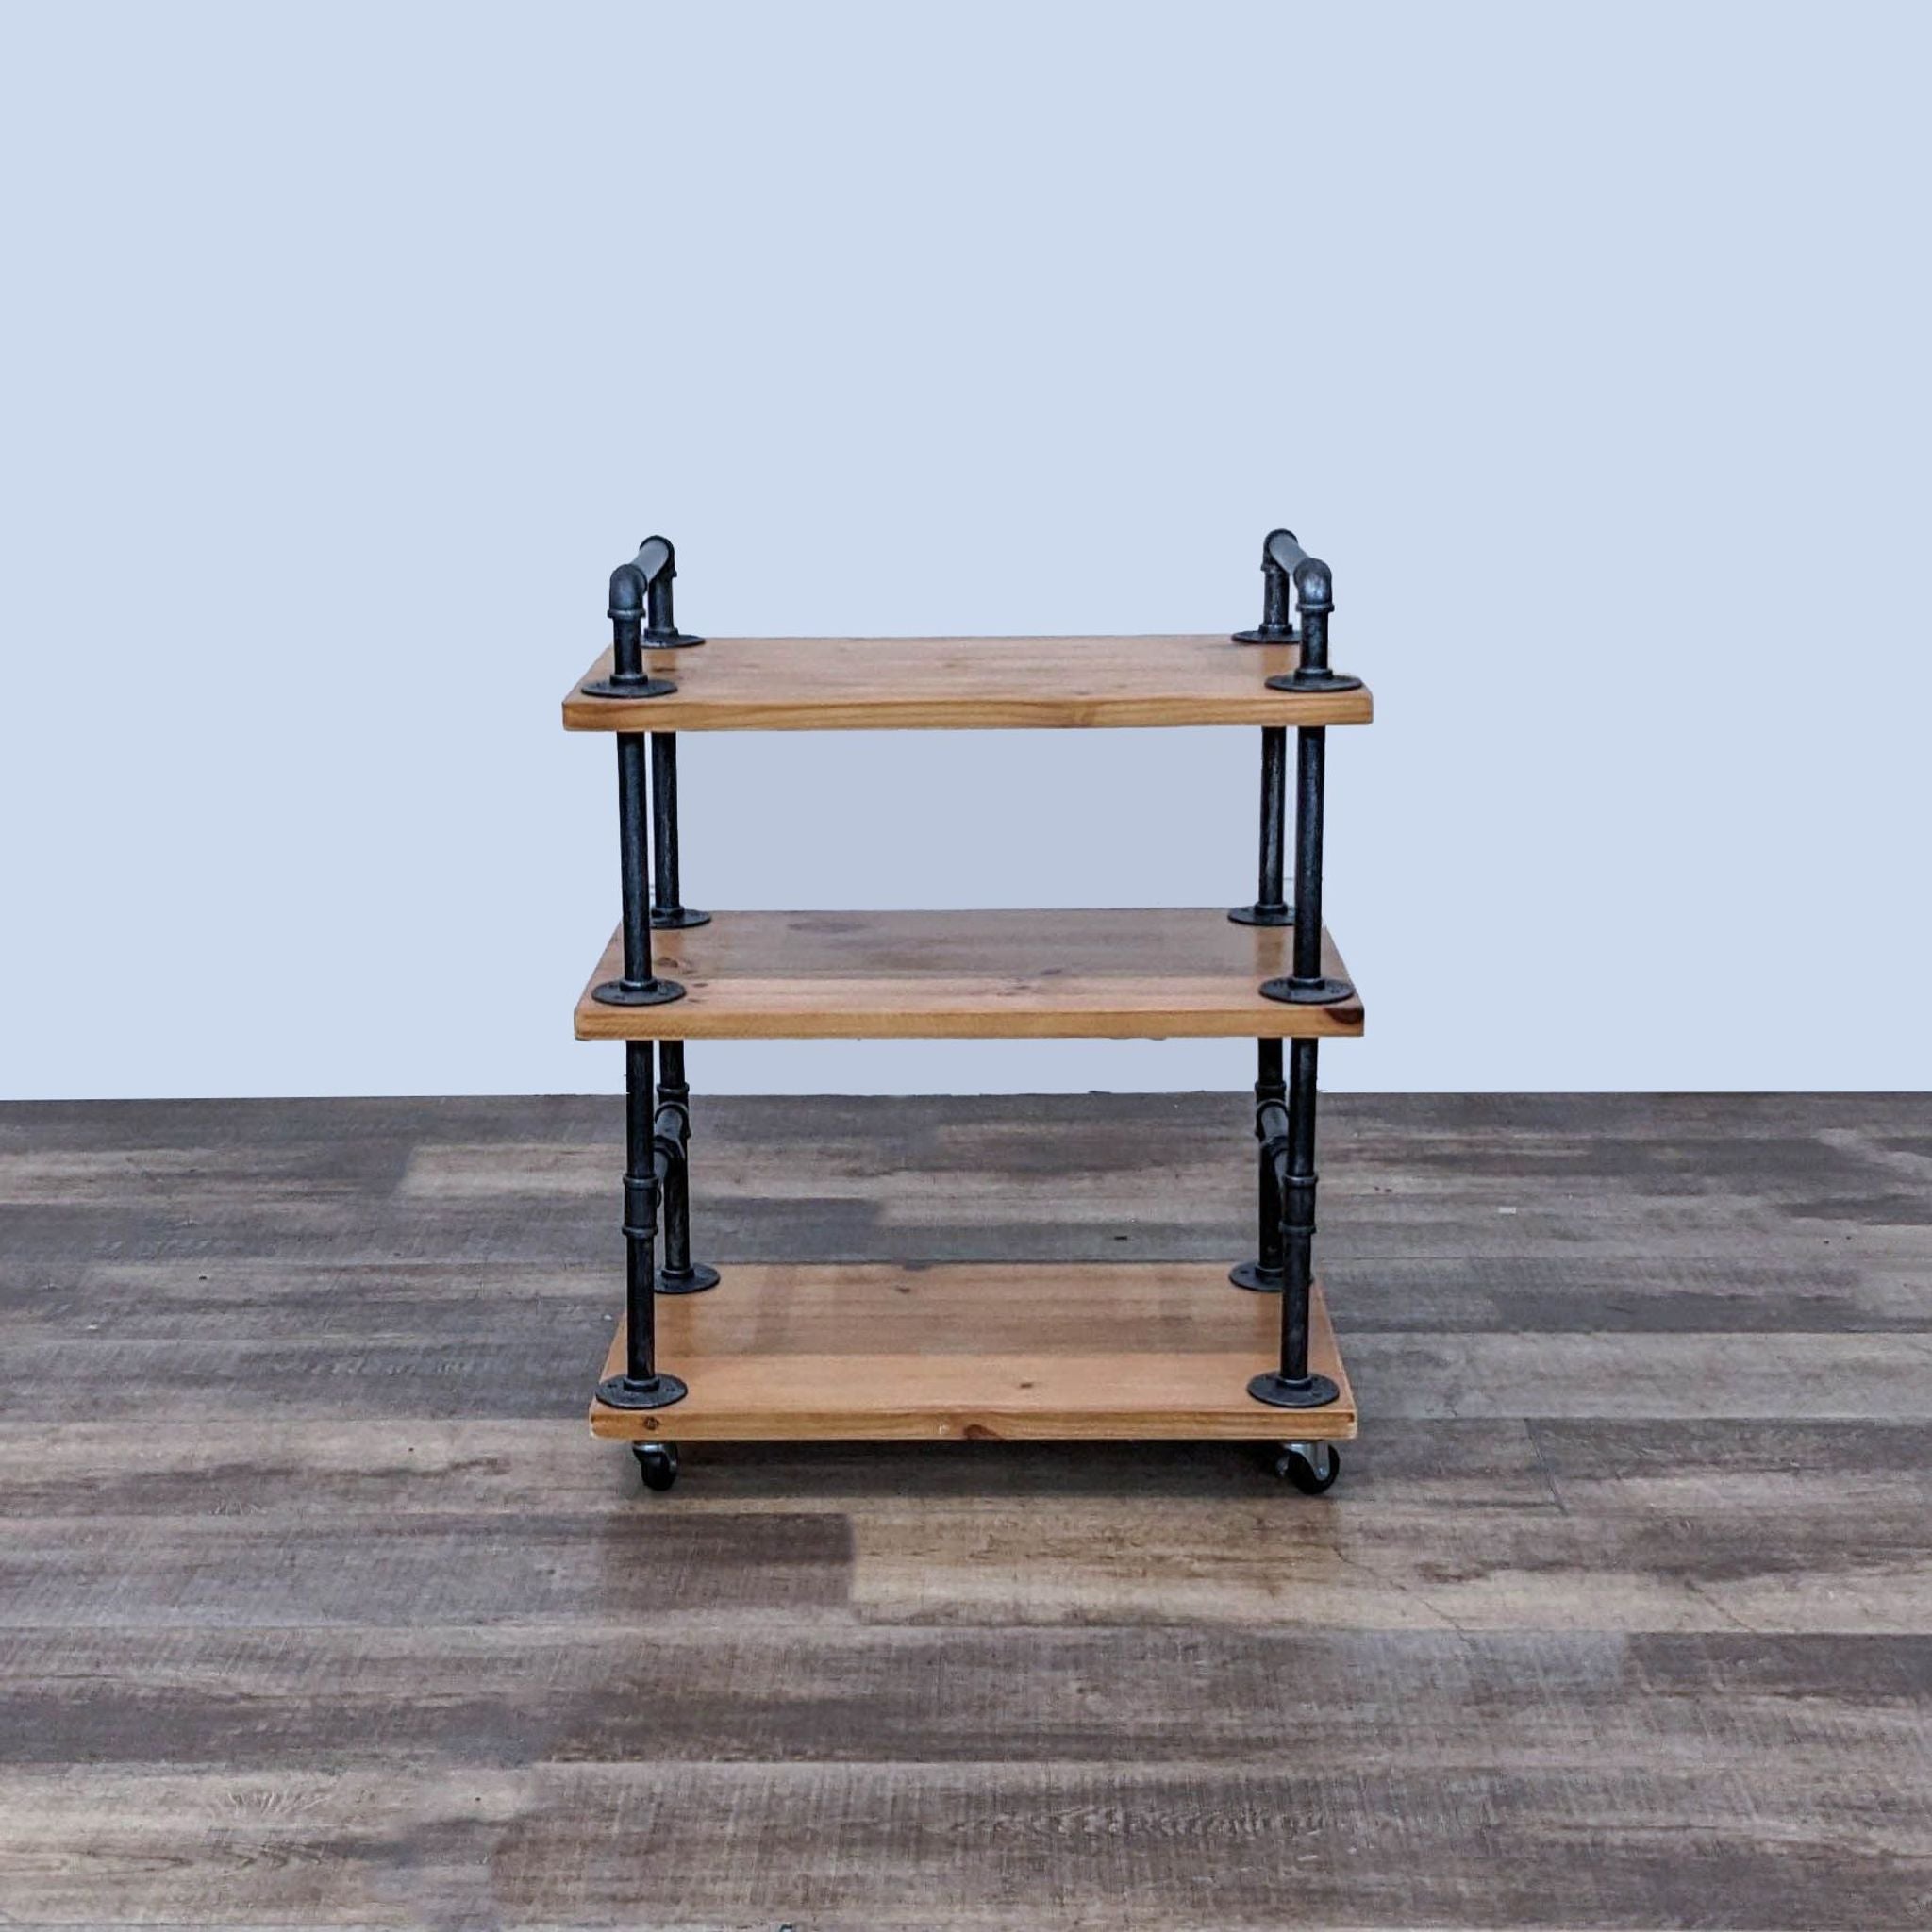 Dofurnilim solid wood, three-tier rolling cart with waterproof finish and black water pipe frame, capable of holding 400lbs.